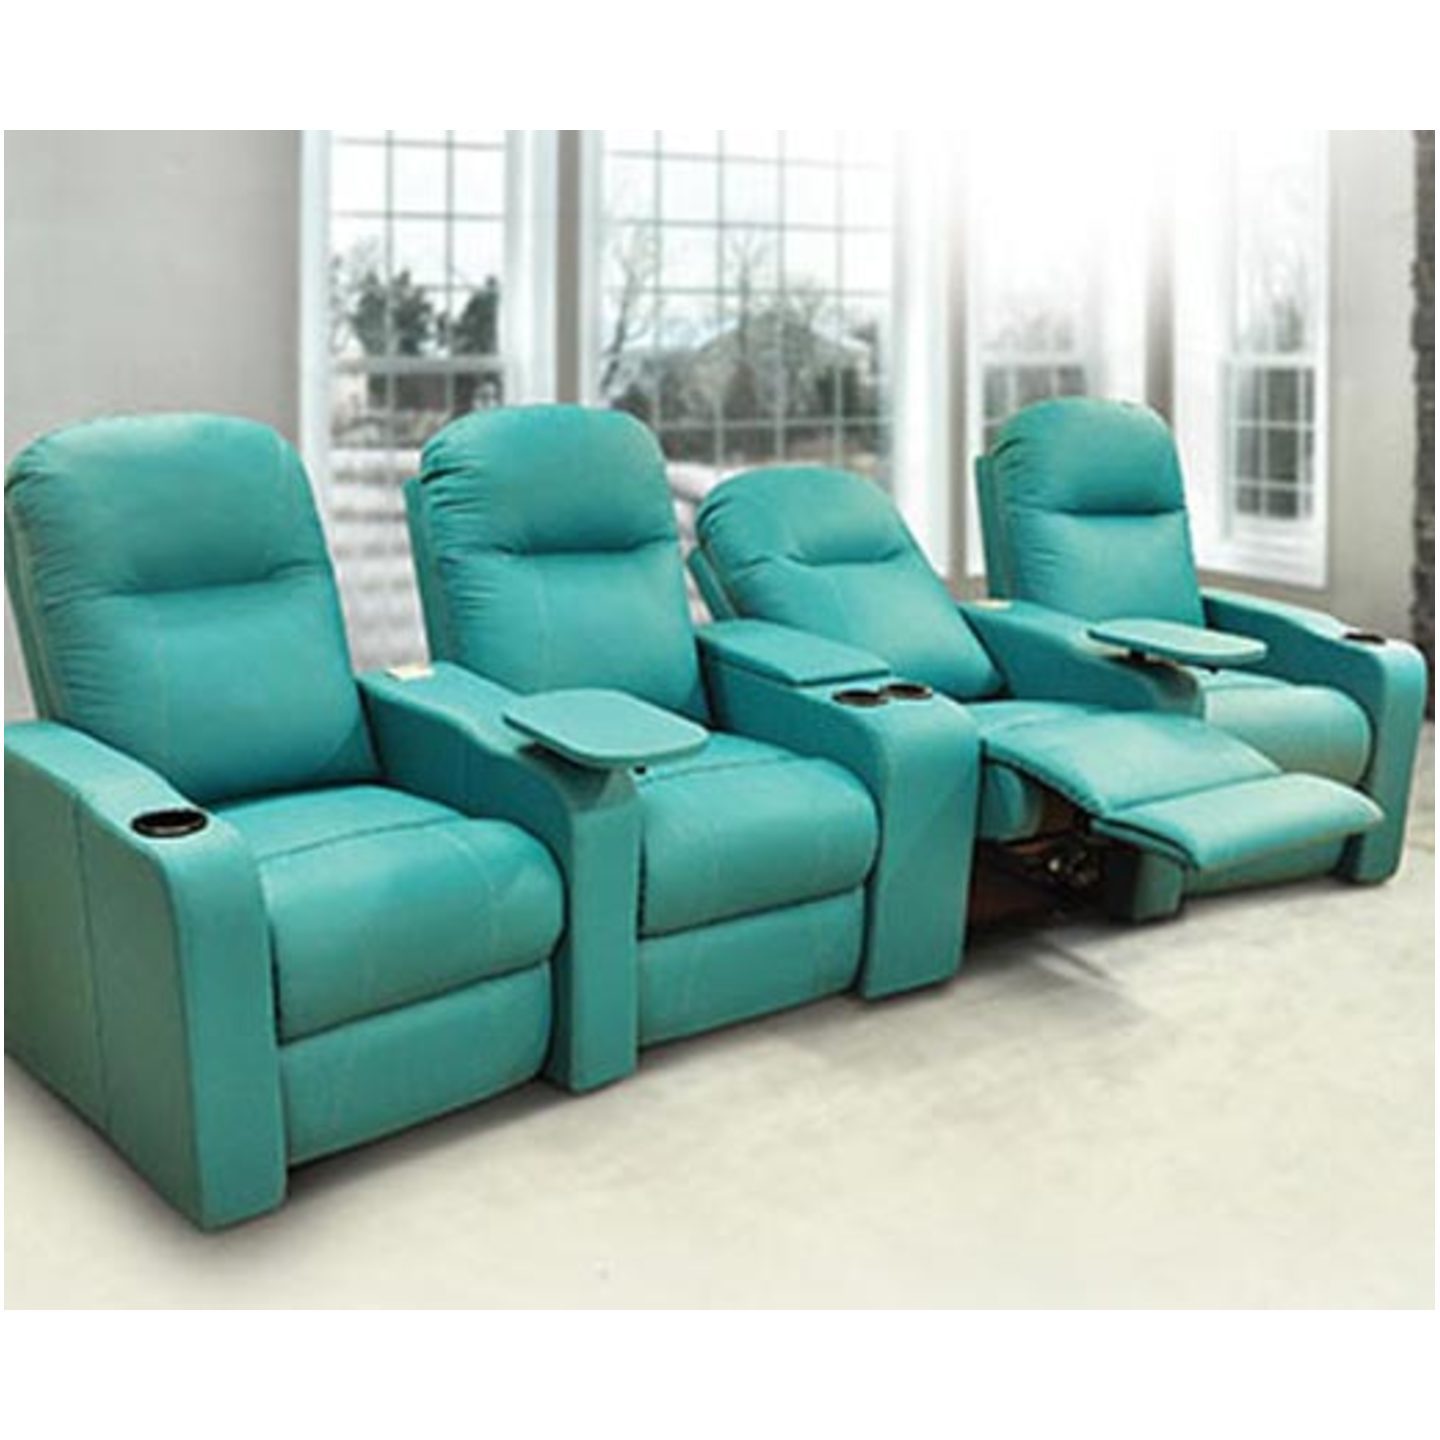 LN Recliner Chair Signature Electronic system